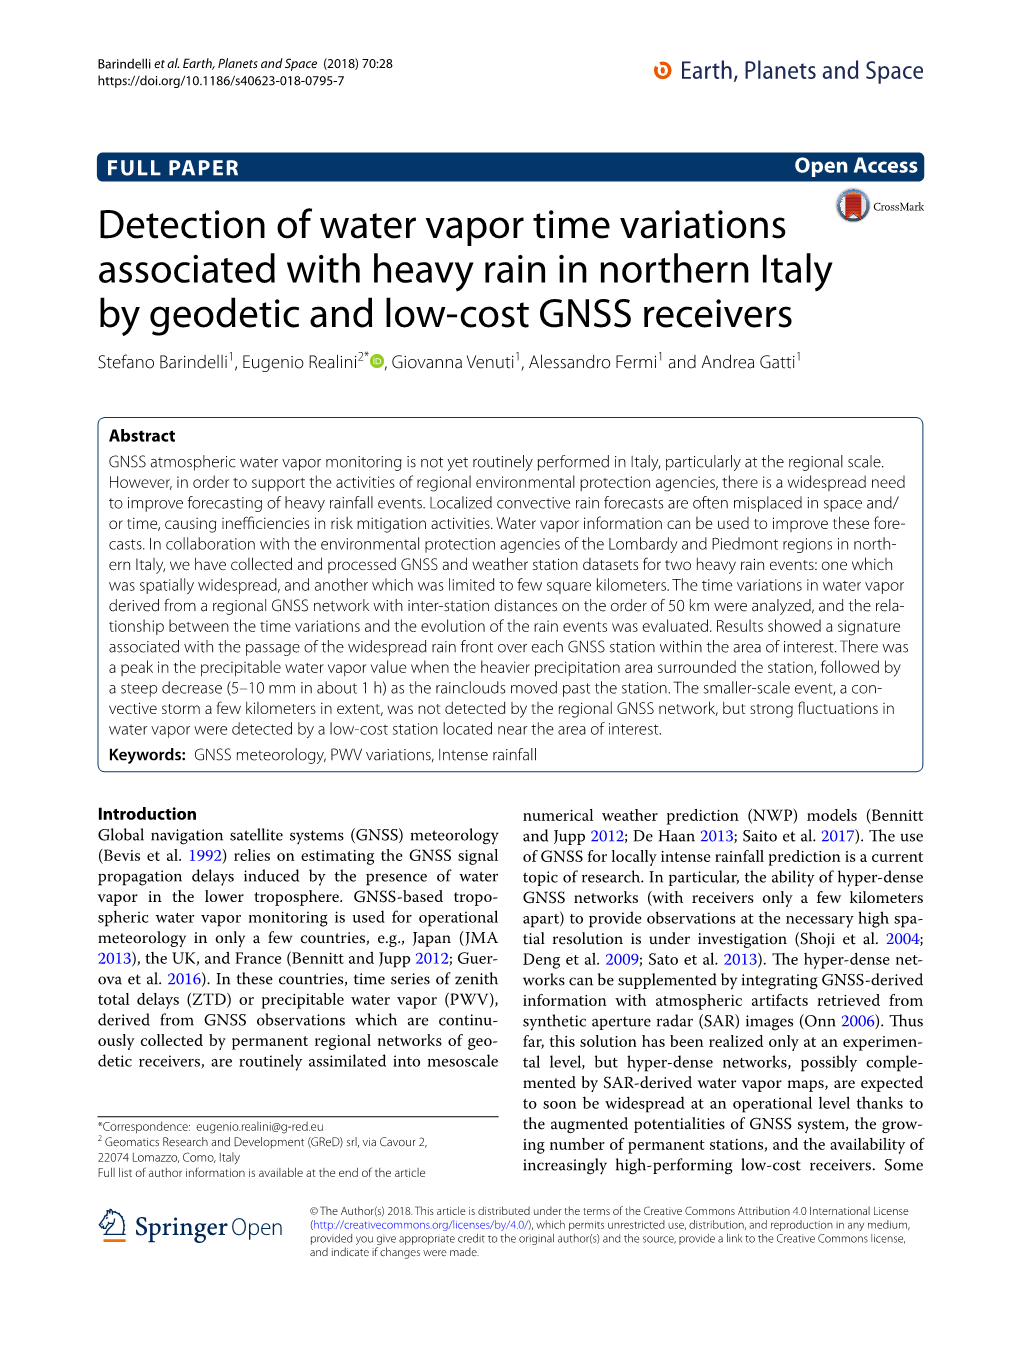 Detection of Water Vapor Time Variations Associated with Heavy